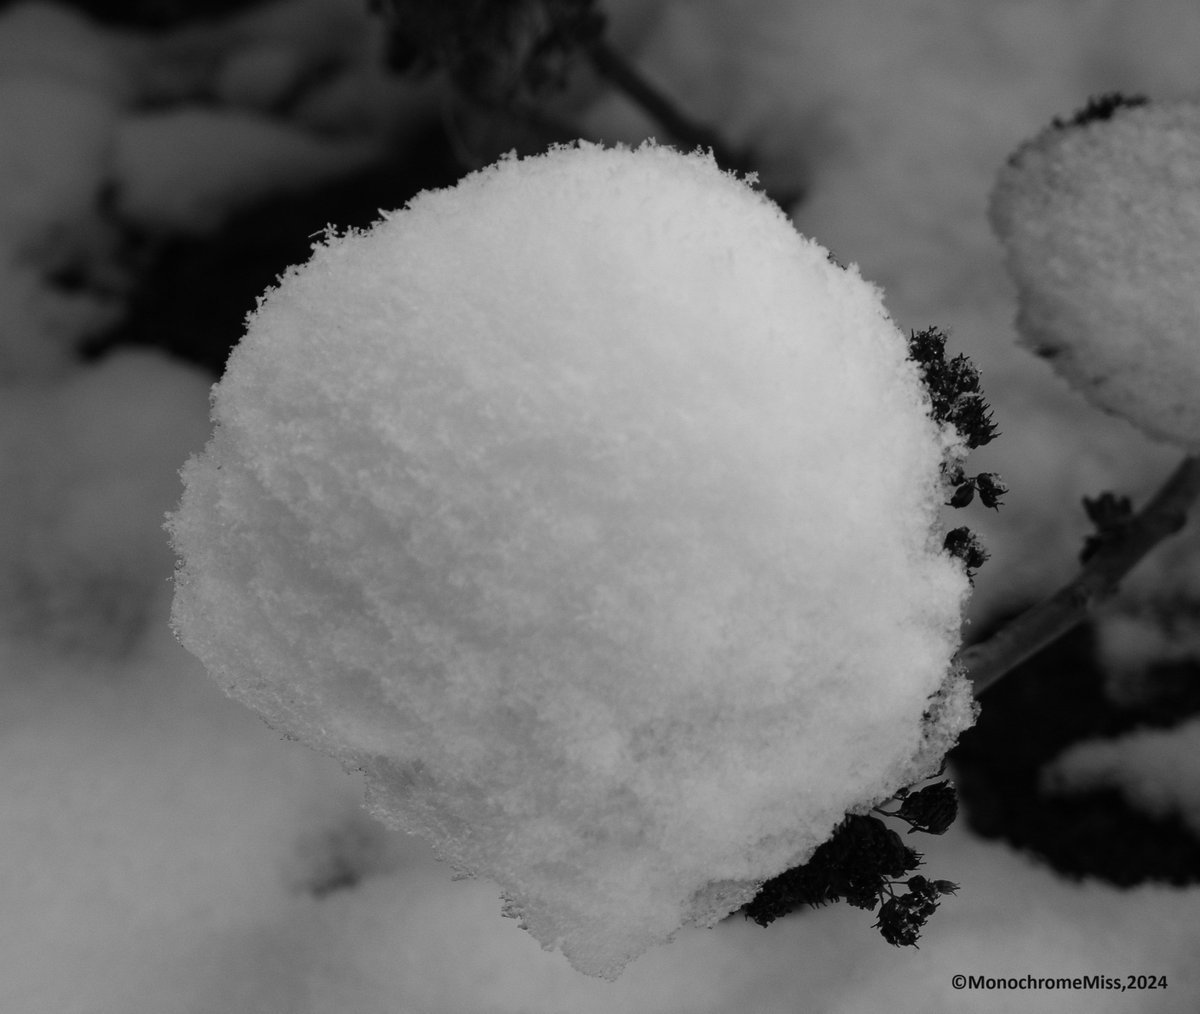 Nature's Snowball, 2024
#Monochrome #bnwphotography #photographylovers #photooftheday #nature #snow #gardens #winter #flowersonfriday #positivevibes